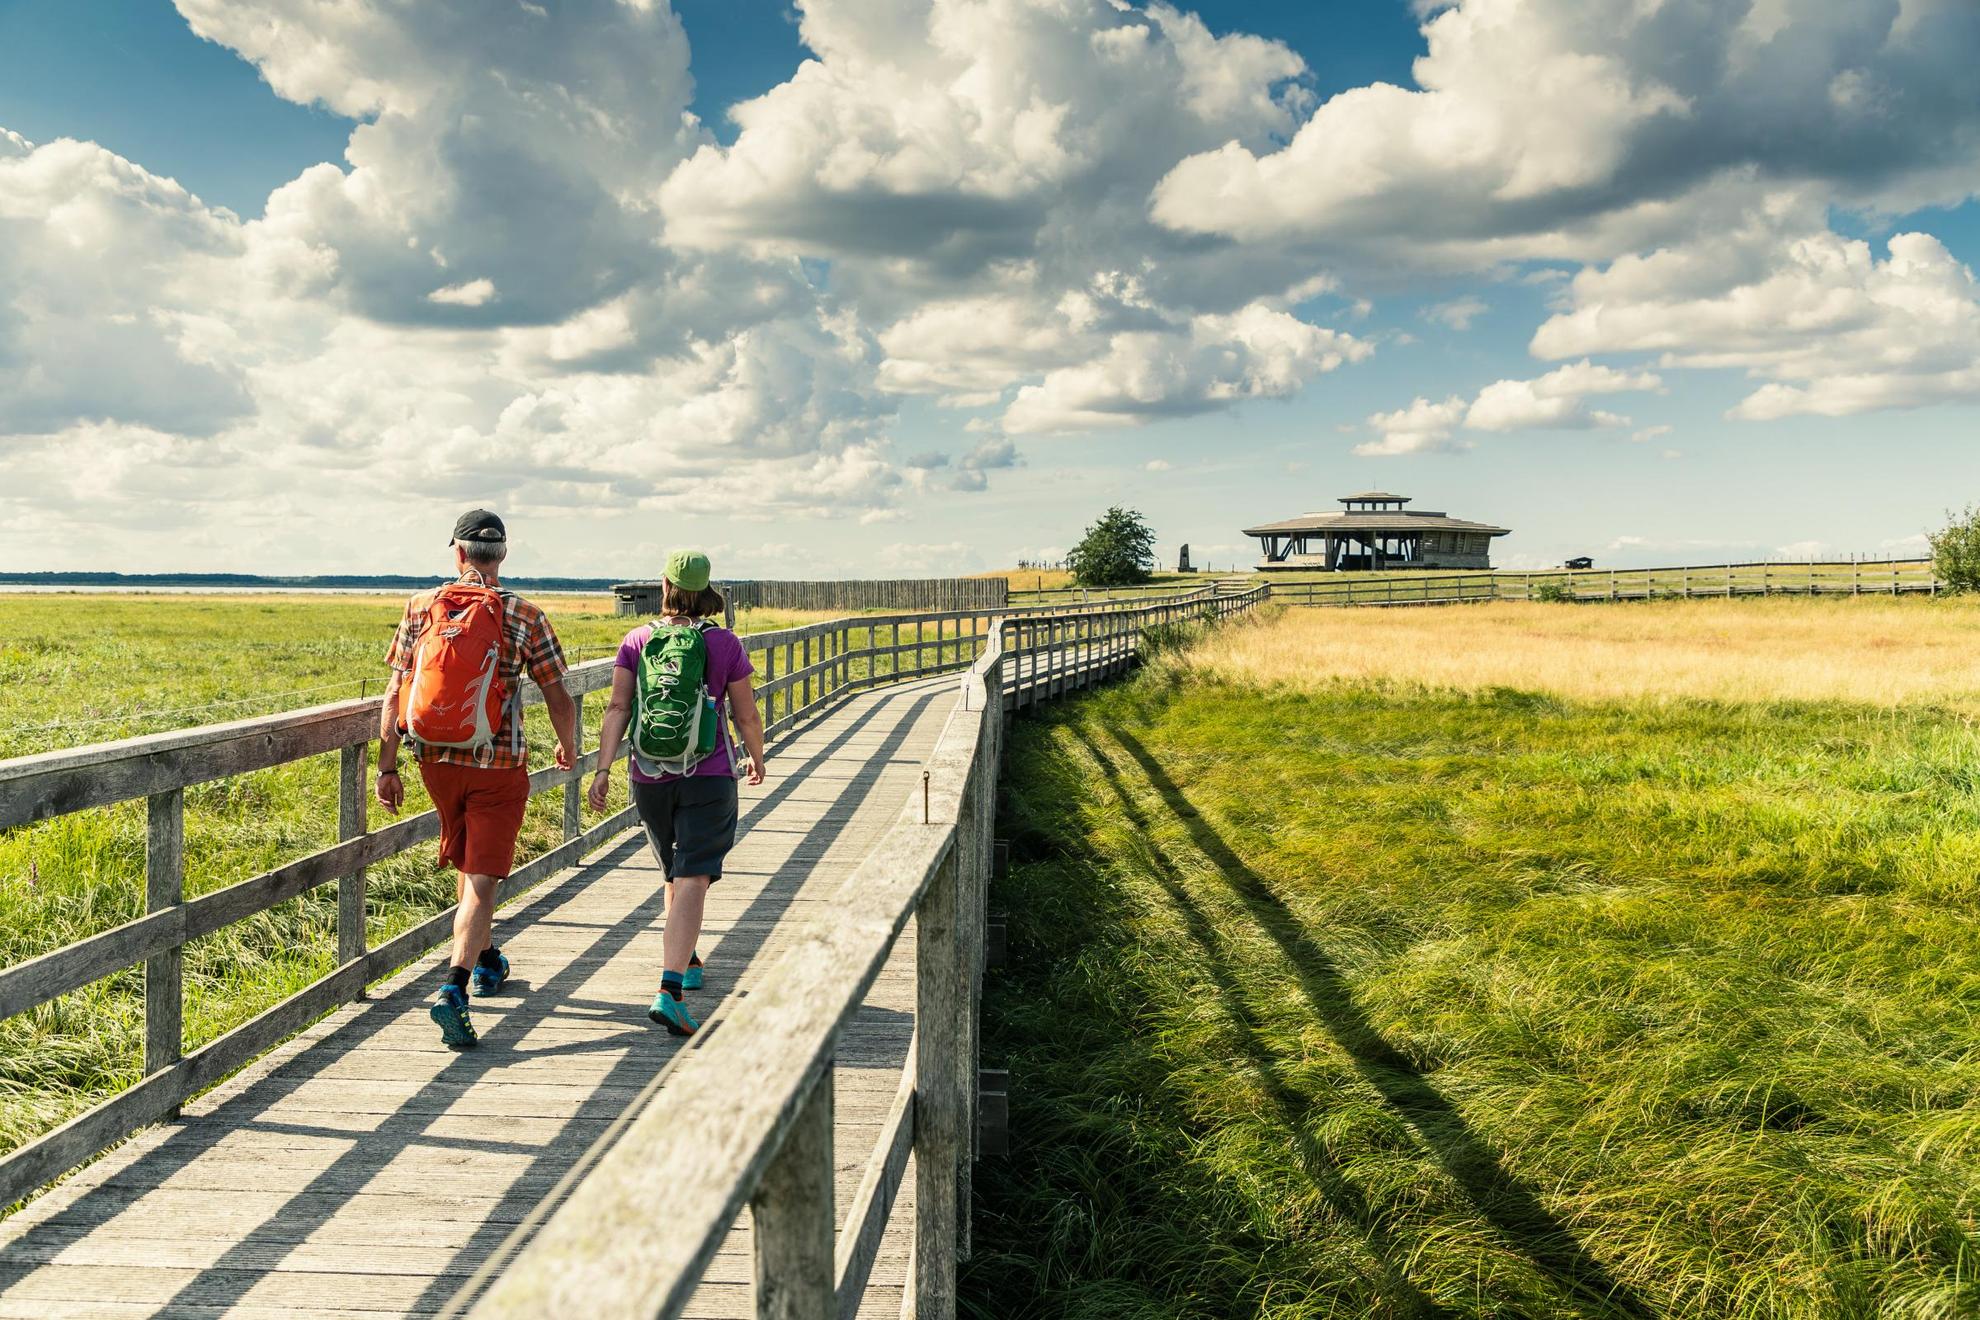 A man and a woman with backpacks are walking on a wooden boardwalk over green grass, leading to a visitor center by lake Horborga.